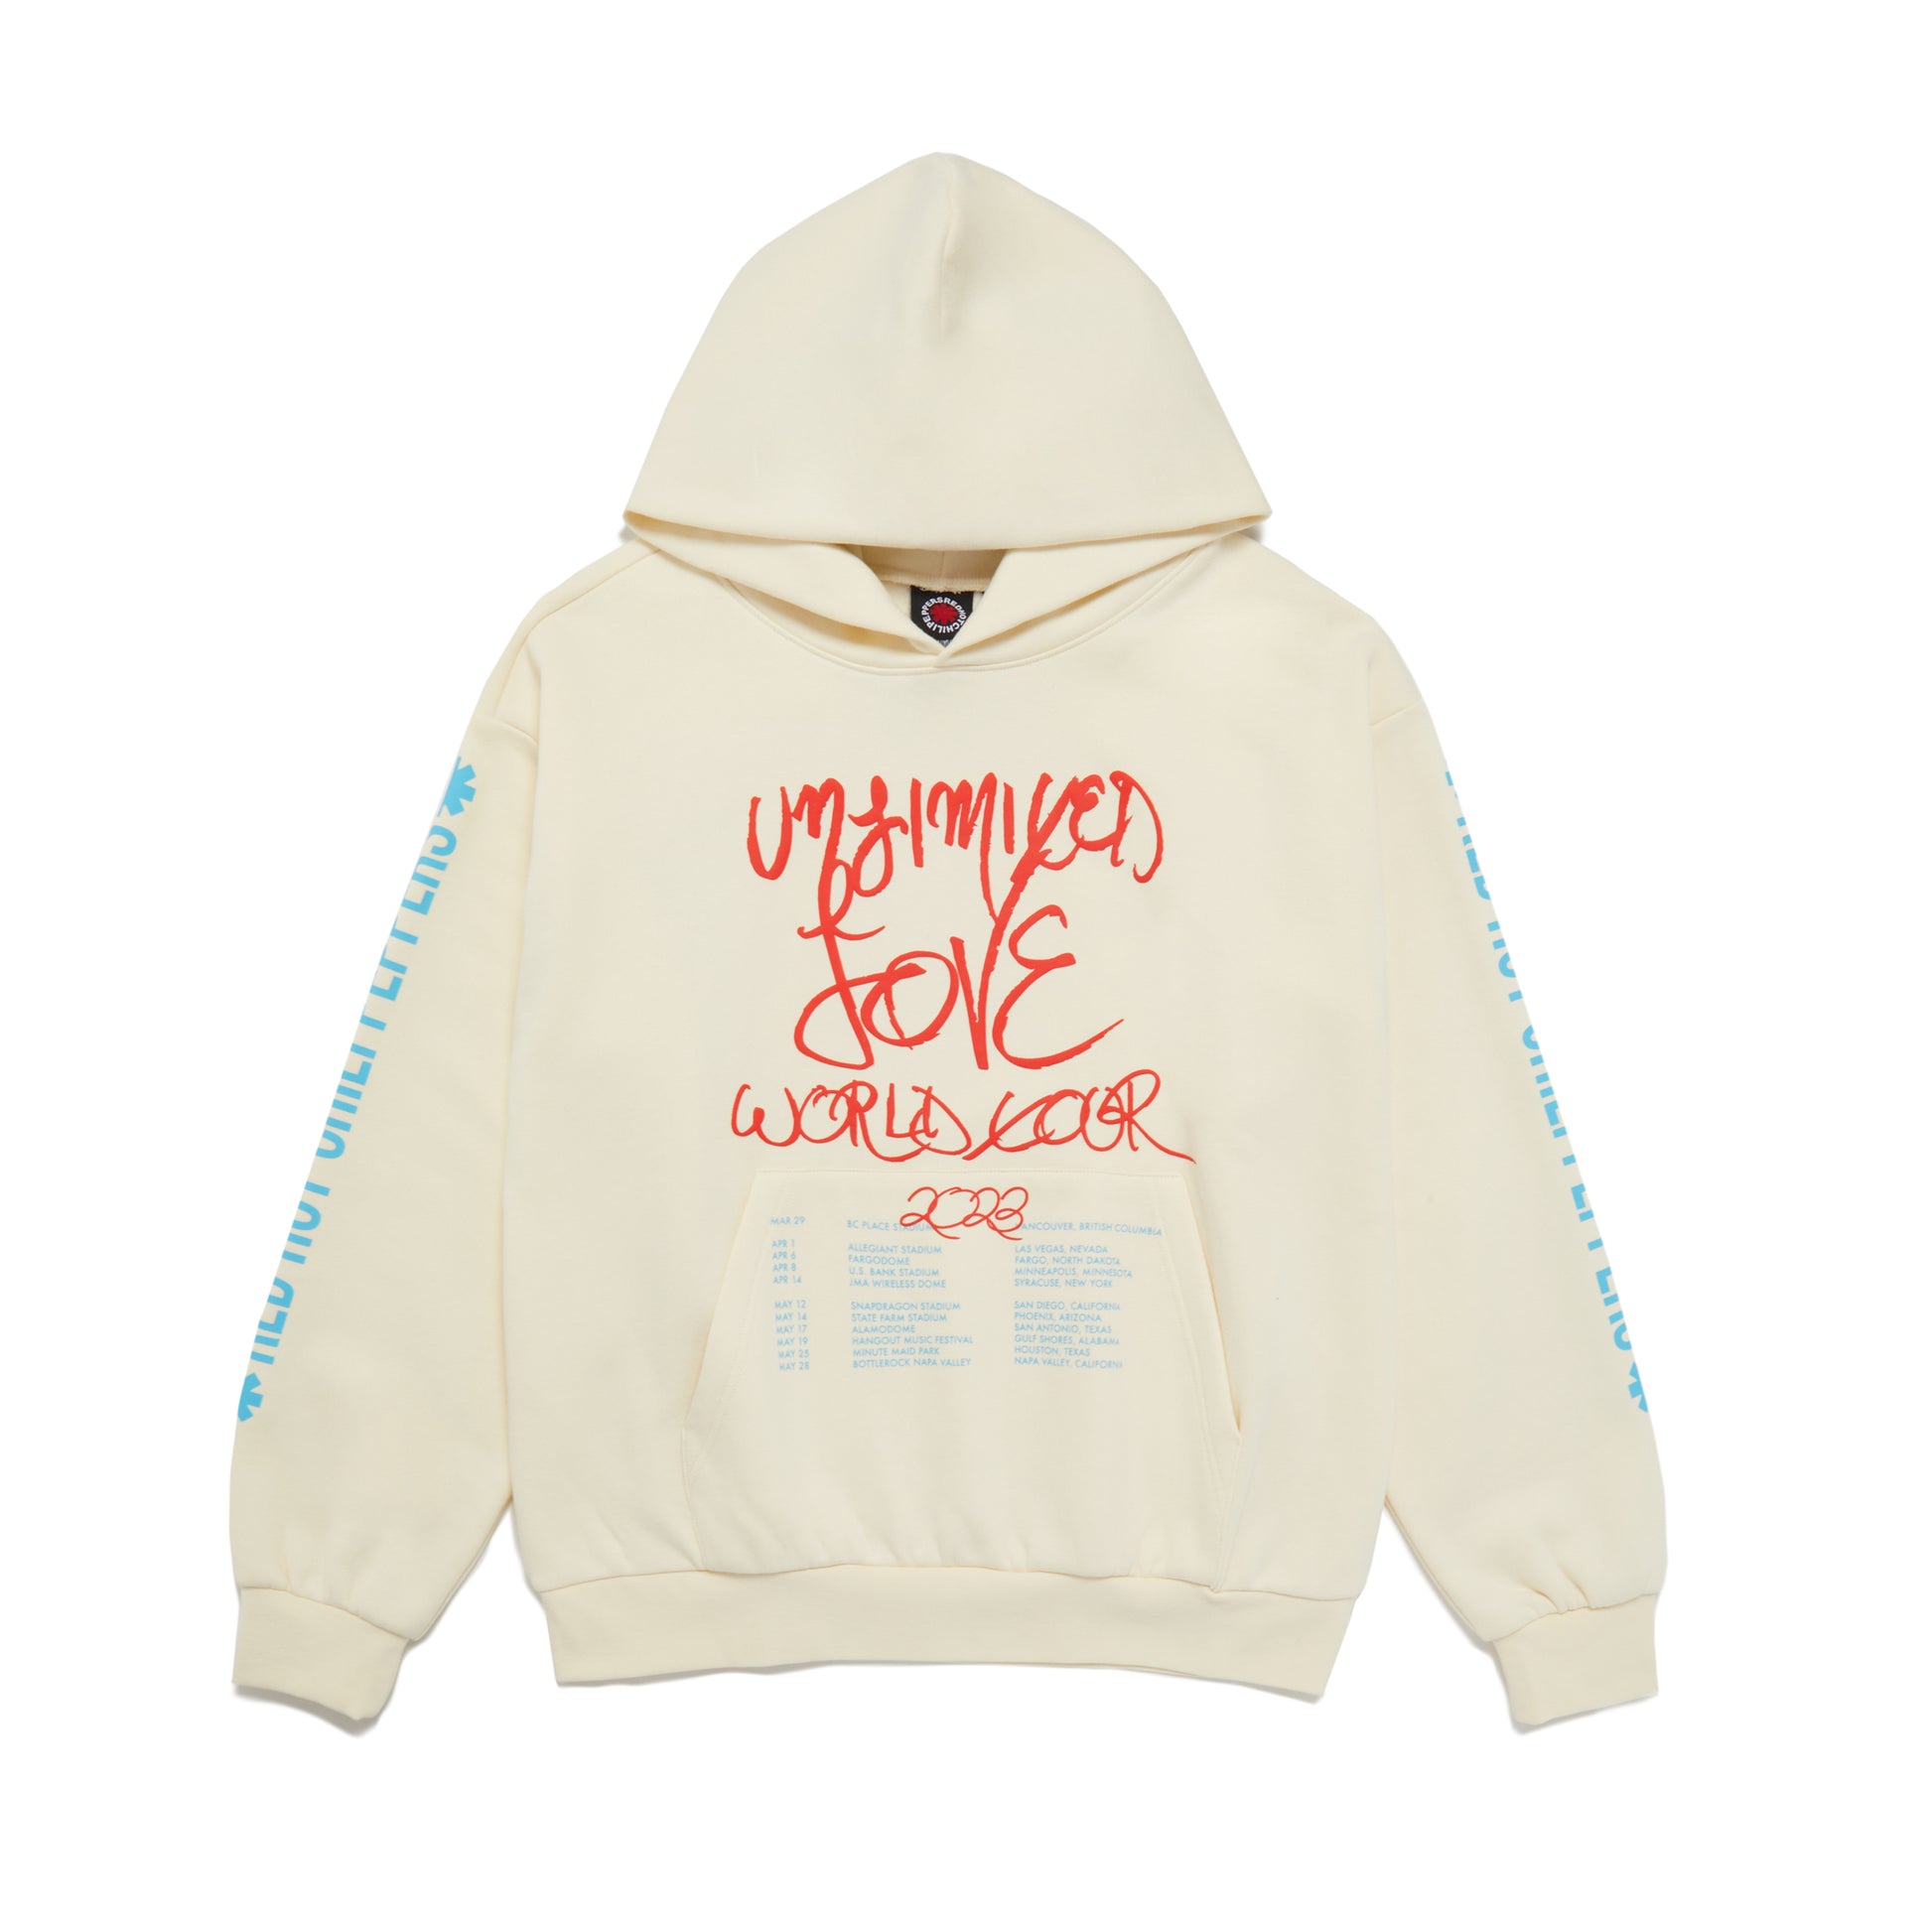 Unlimited Love USA Tour Hoodie – Red Hot Chili Peppers